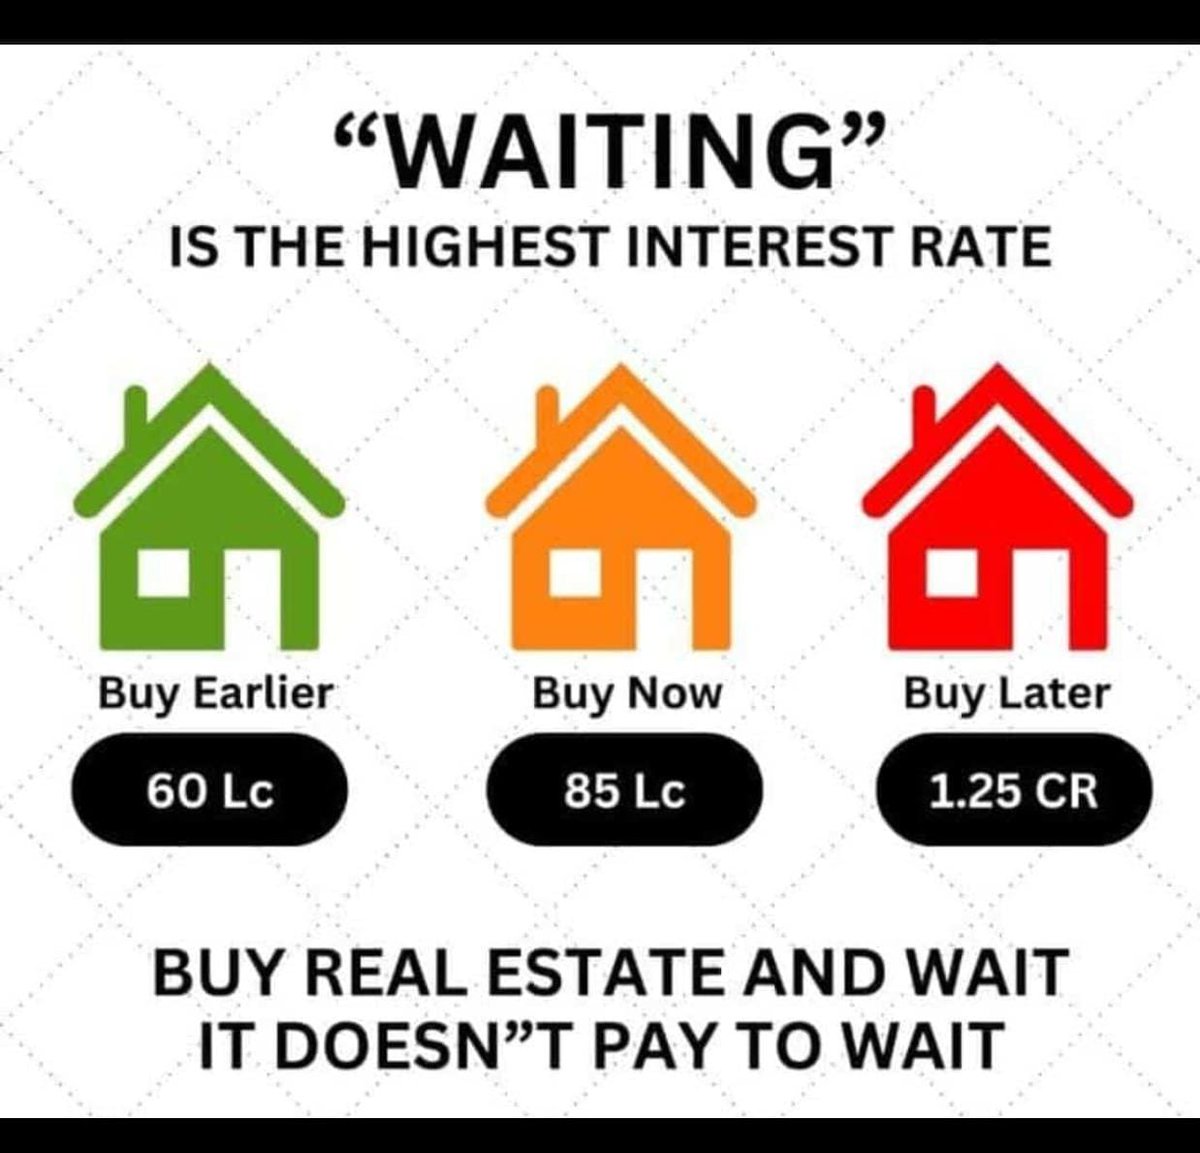 #Pune_RealEstate 
#WestPune_RealEstate
#DreamHome
#Best_Location 
#NewProperty
#Best_ROI
#Growth_and_Appreciation
#investment
Eminent Realtors 
Real Asset Management 
#ICP ❤️❣️